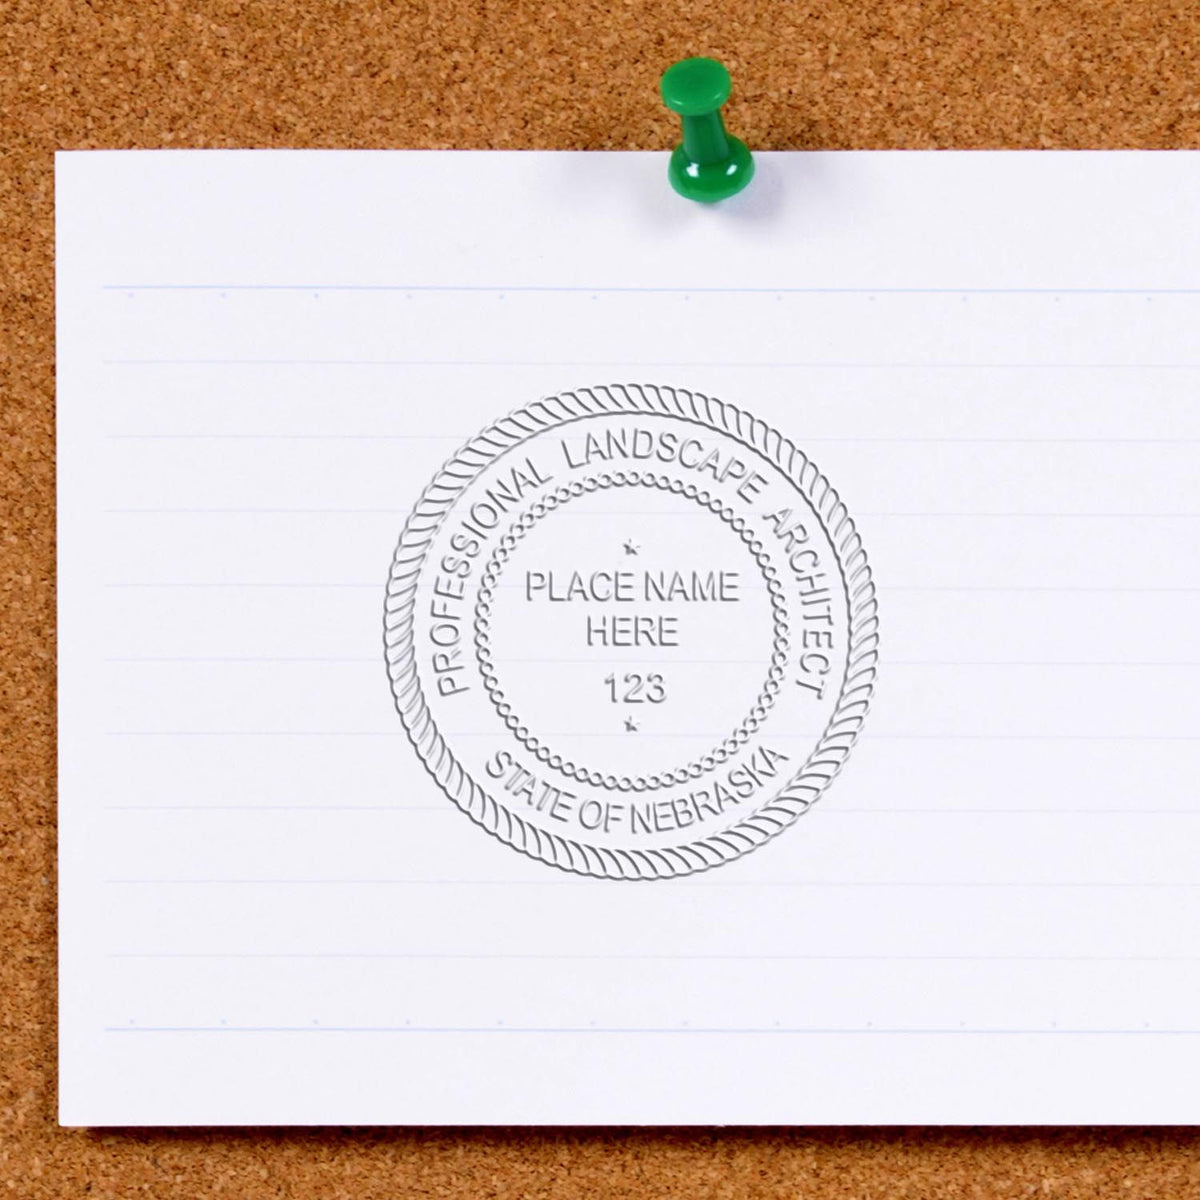 An in use photo of the Gift Nebraska Landscape Architect Seal showing a sample imprint on a cardstock